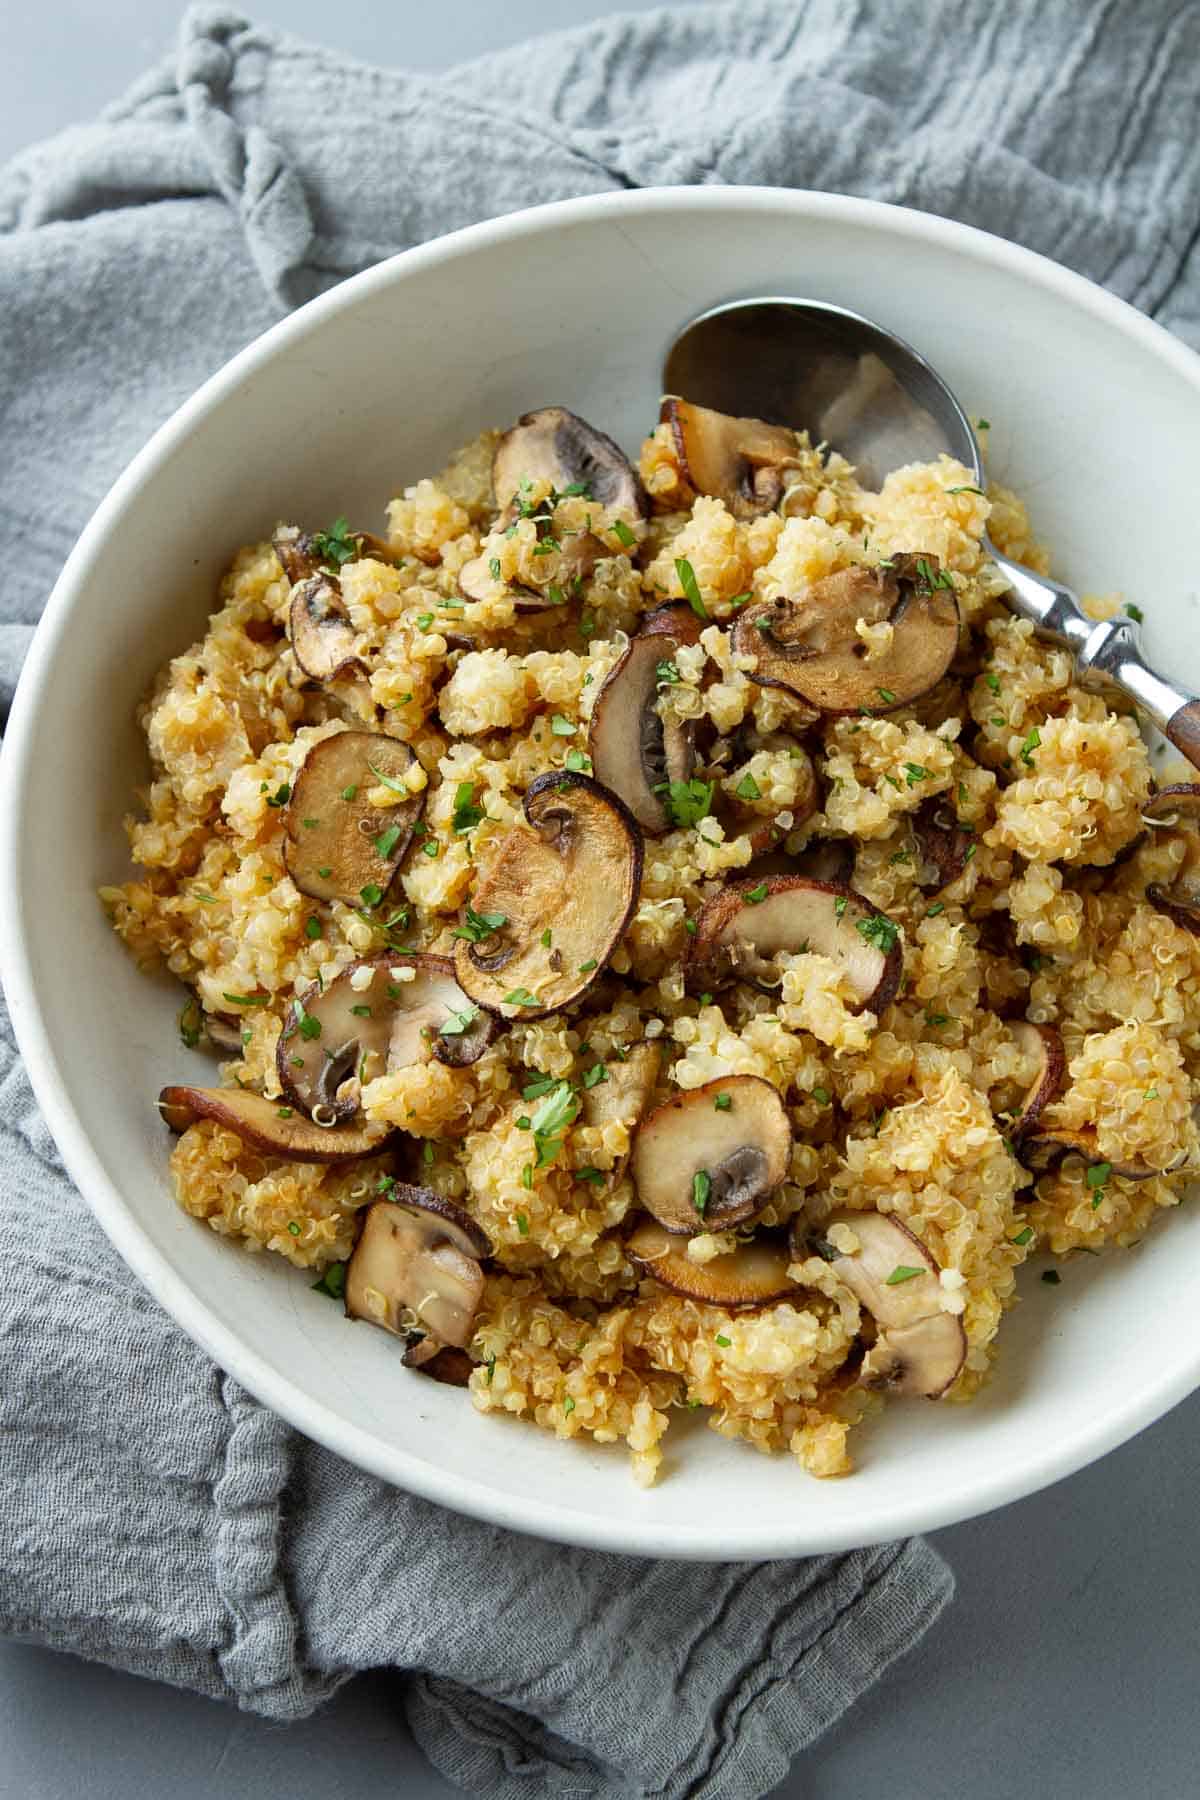 Quinoa with mushrooms in a white bowl.